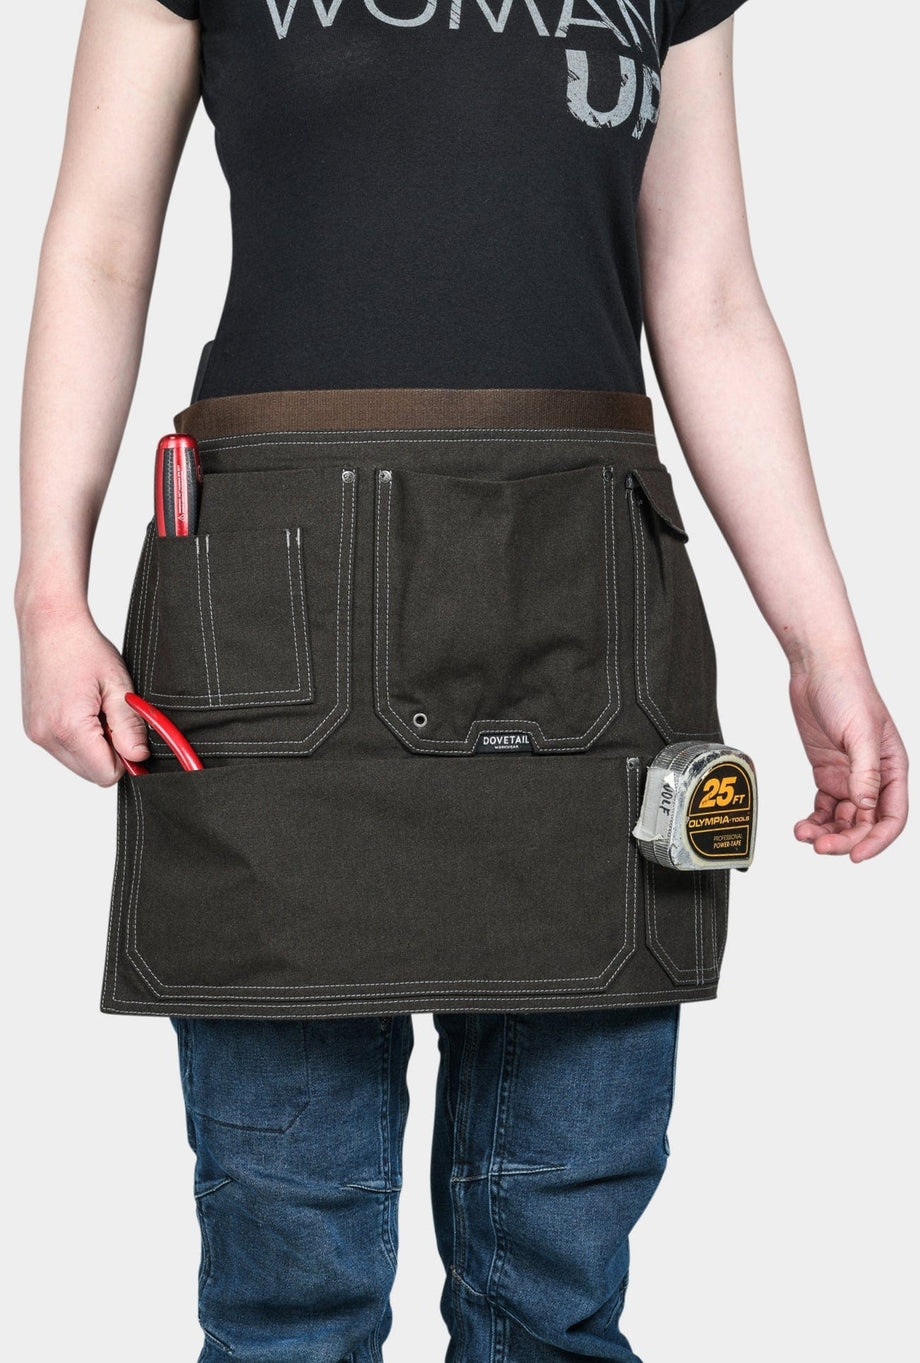 Dovetail Tool Apron - Quest Outdoors